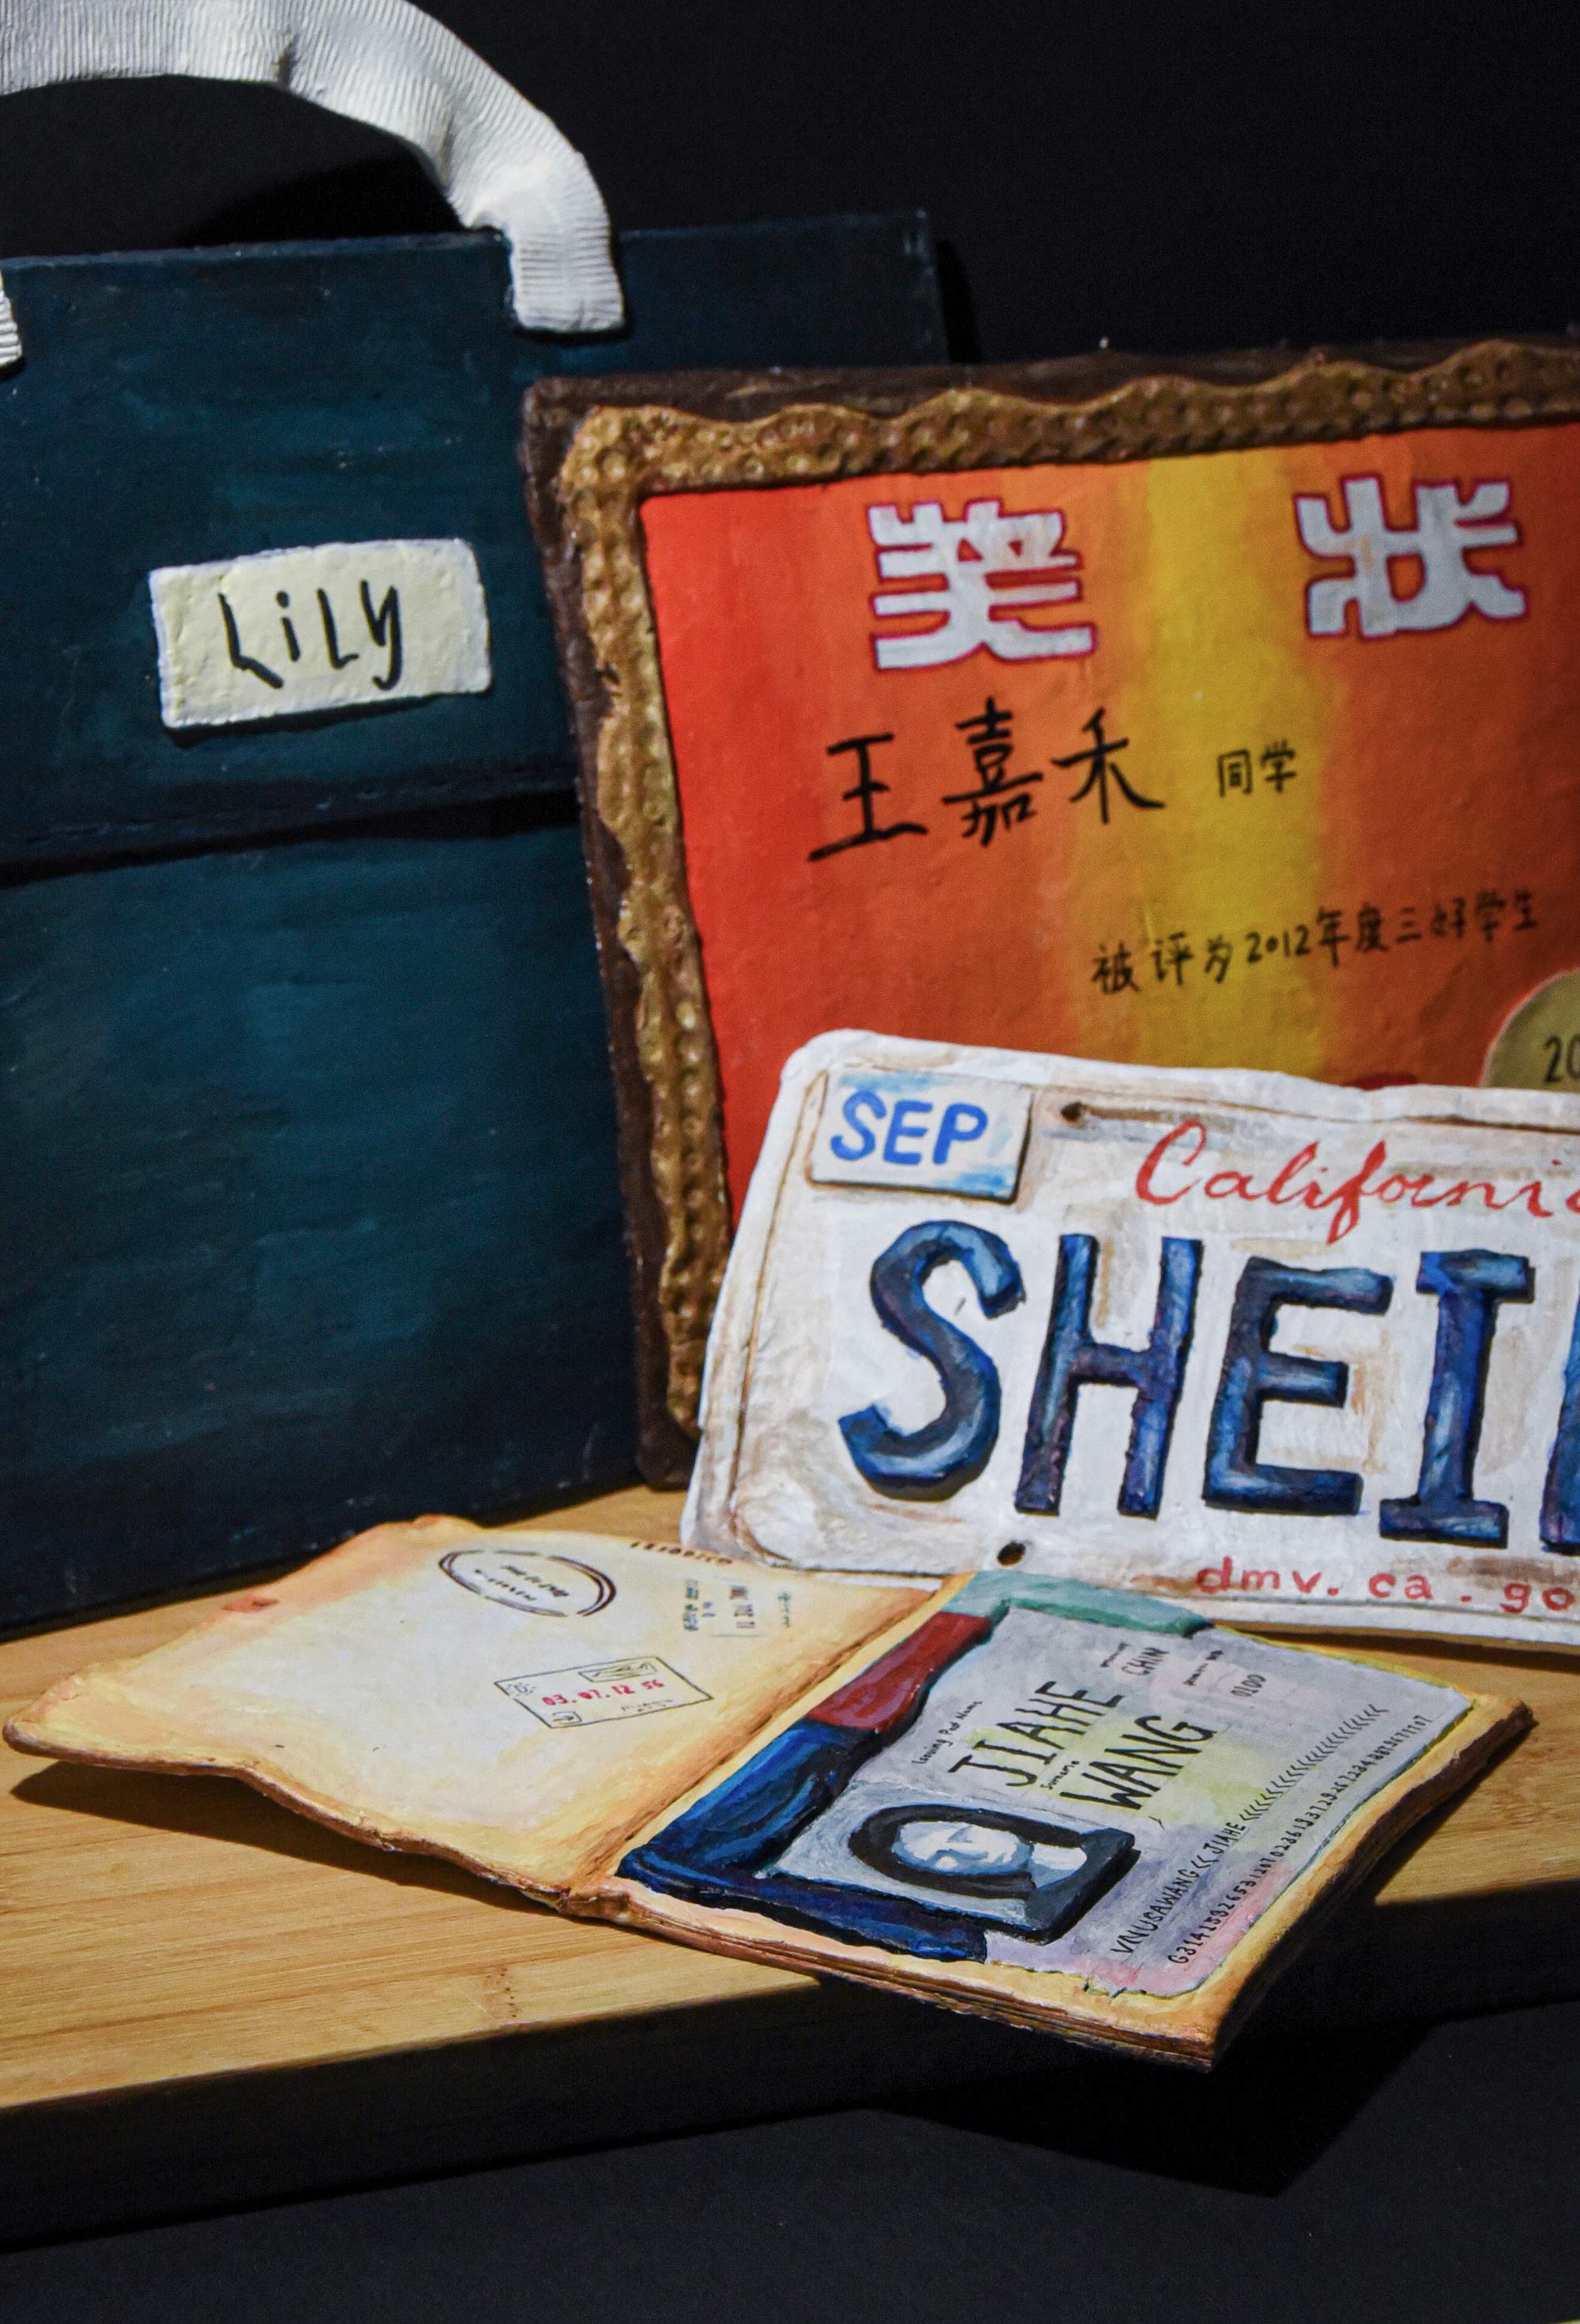 A painting of A painting of a bag labeled "Lily" with a California license plate and other items